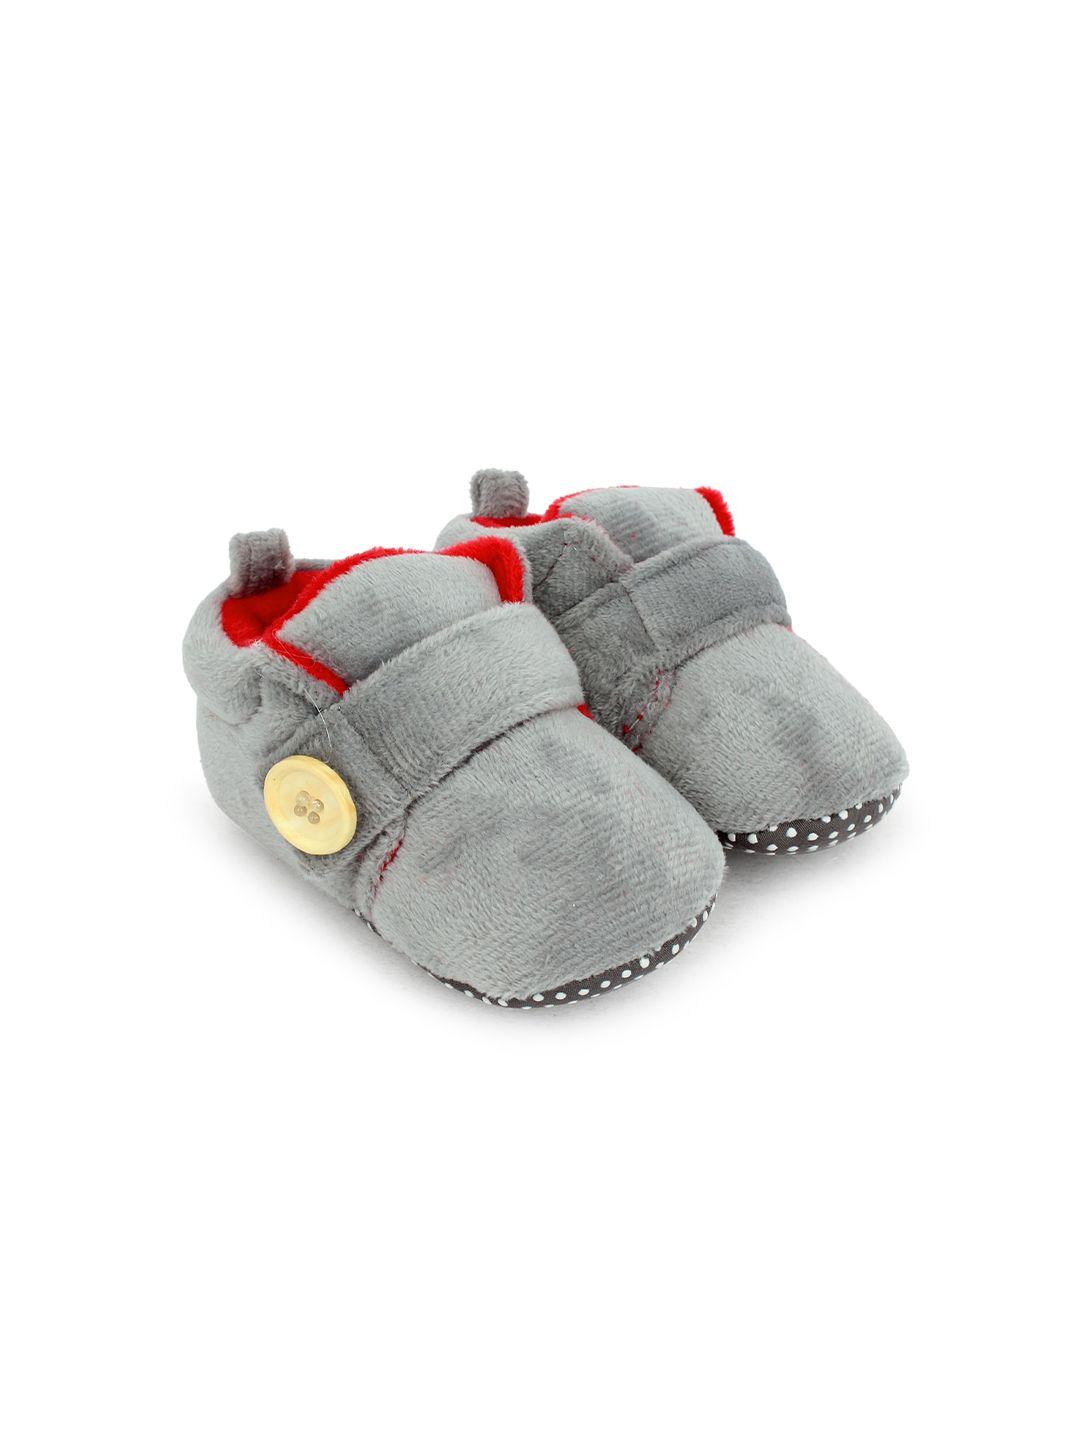 superminis infant kids grey & red solid booties